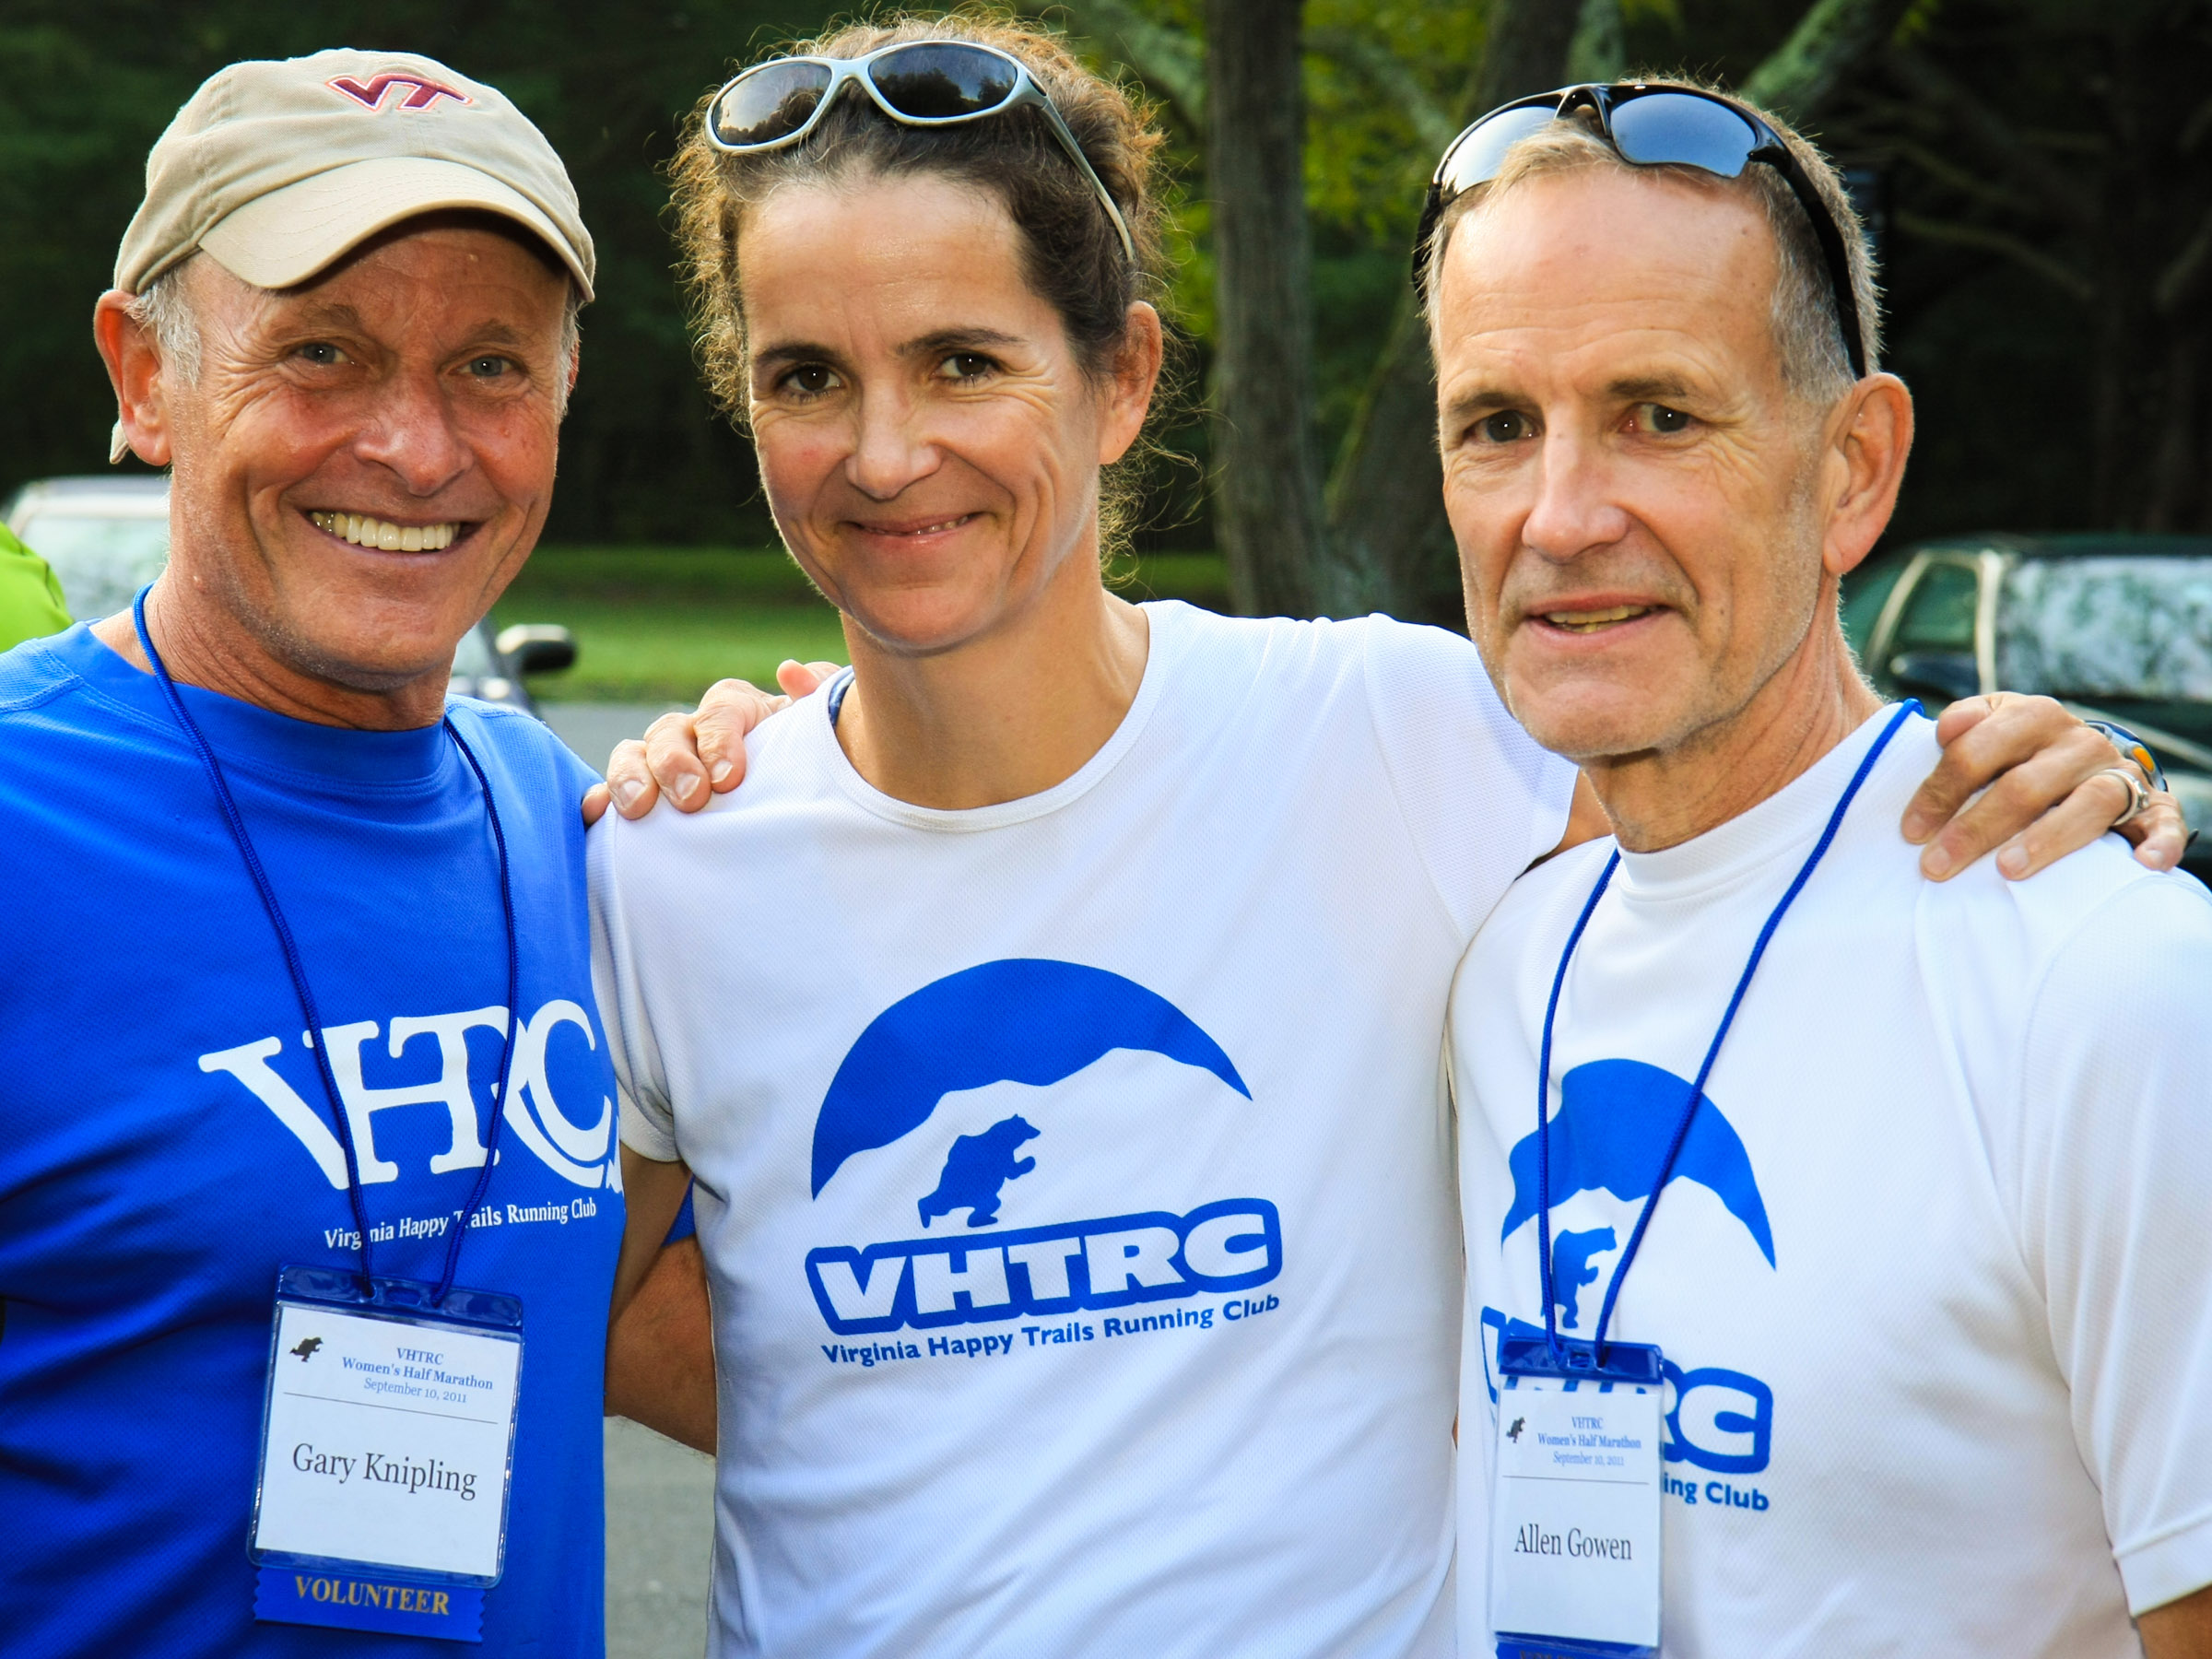 Gary Knipling, Sophie Speidel, and Alan Gowen: Volunteers from the 2011 event